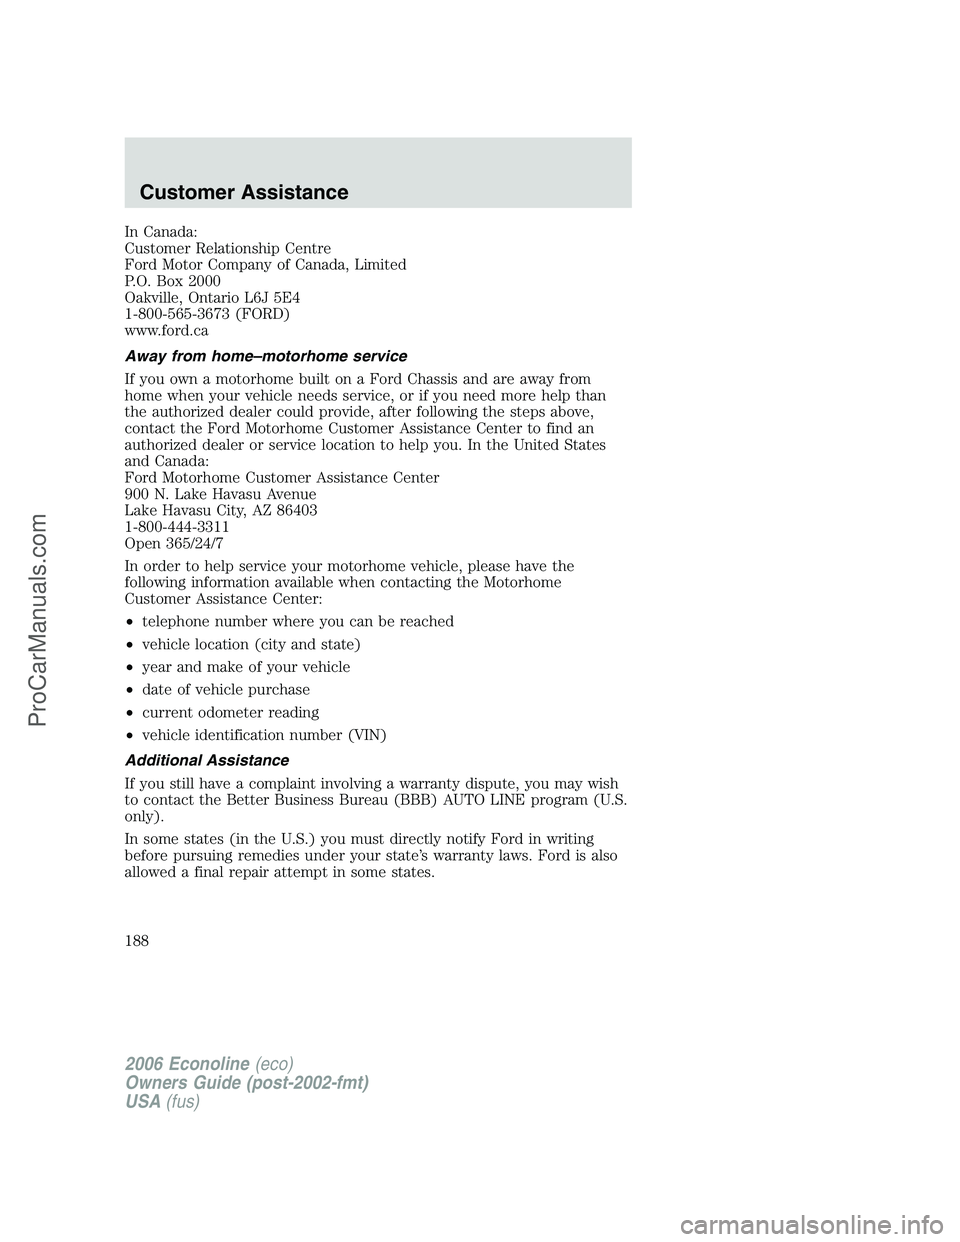 FORD E-350 2006  Owners Manual In Canada:
Customer Relationship Centre
Ford Motor Company of Canada, Limited
P.O. Box 2000
Oakville, Ontario L6J 5E4
1-800-565-3673 (FORD)
www.ford.ca
Away from home–motorhome service
If you own a 